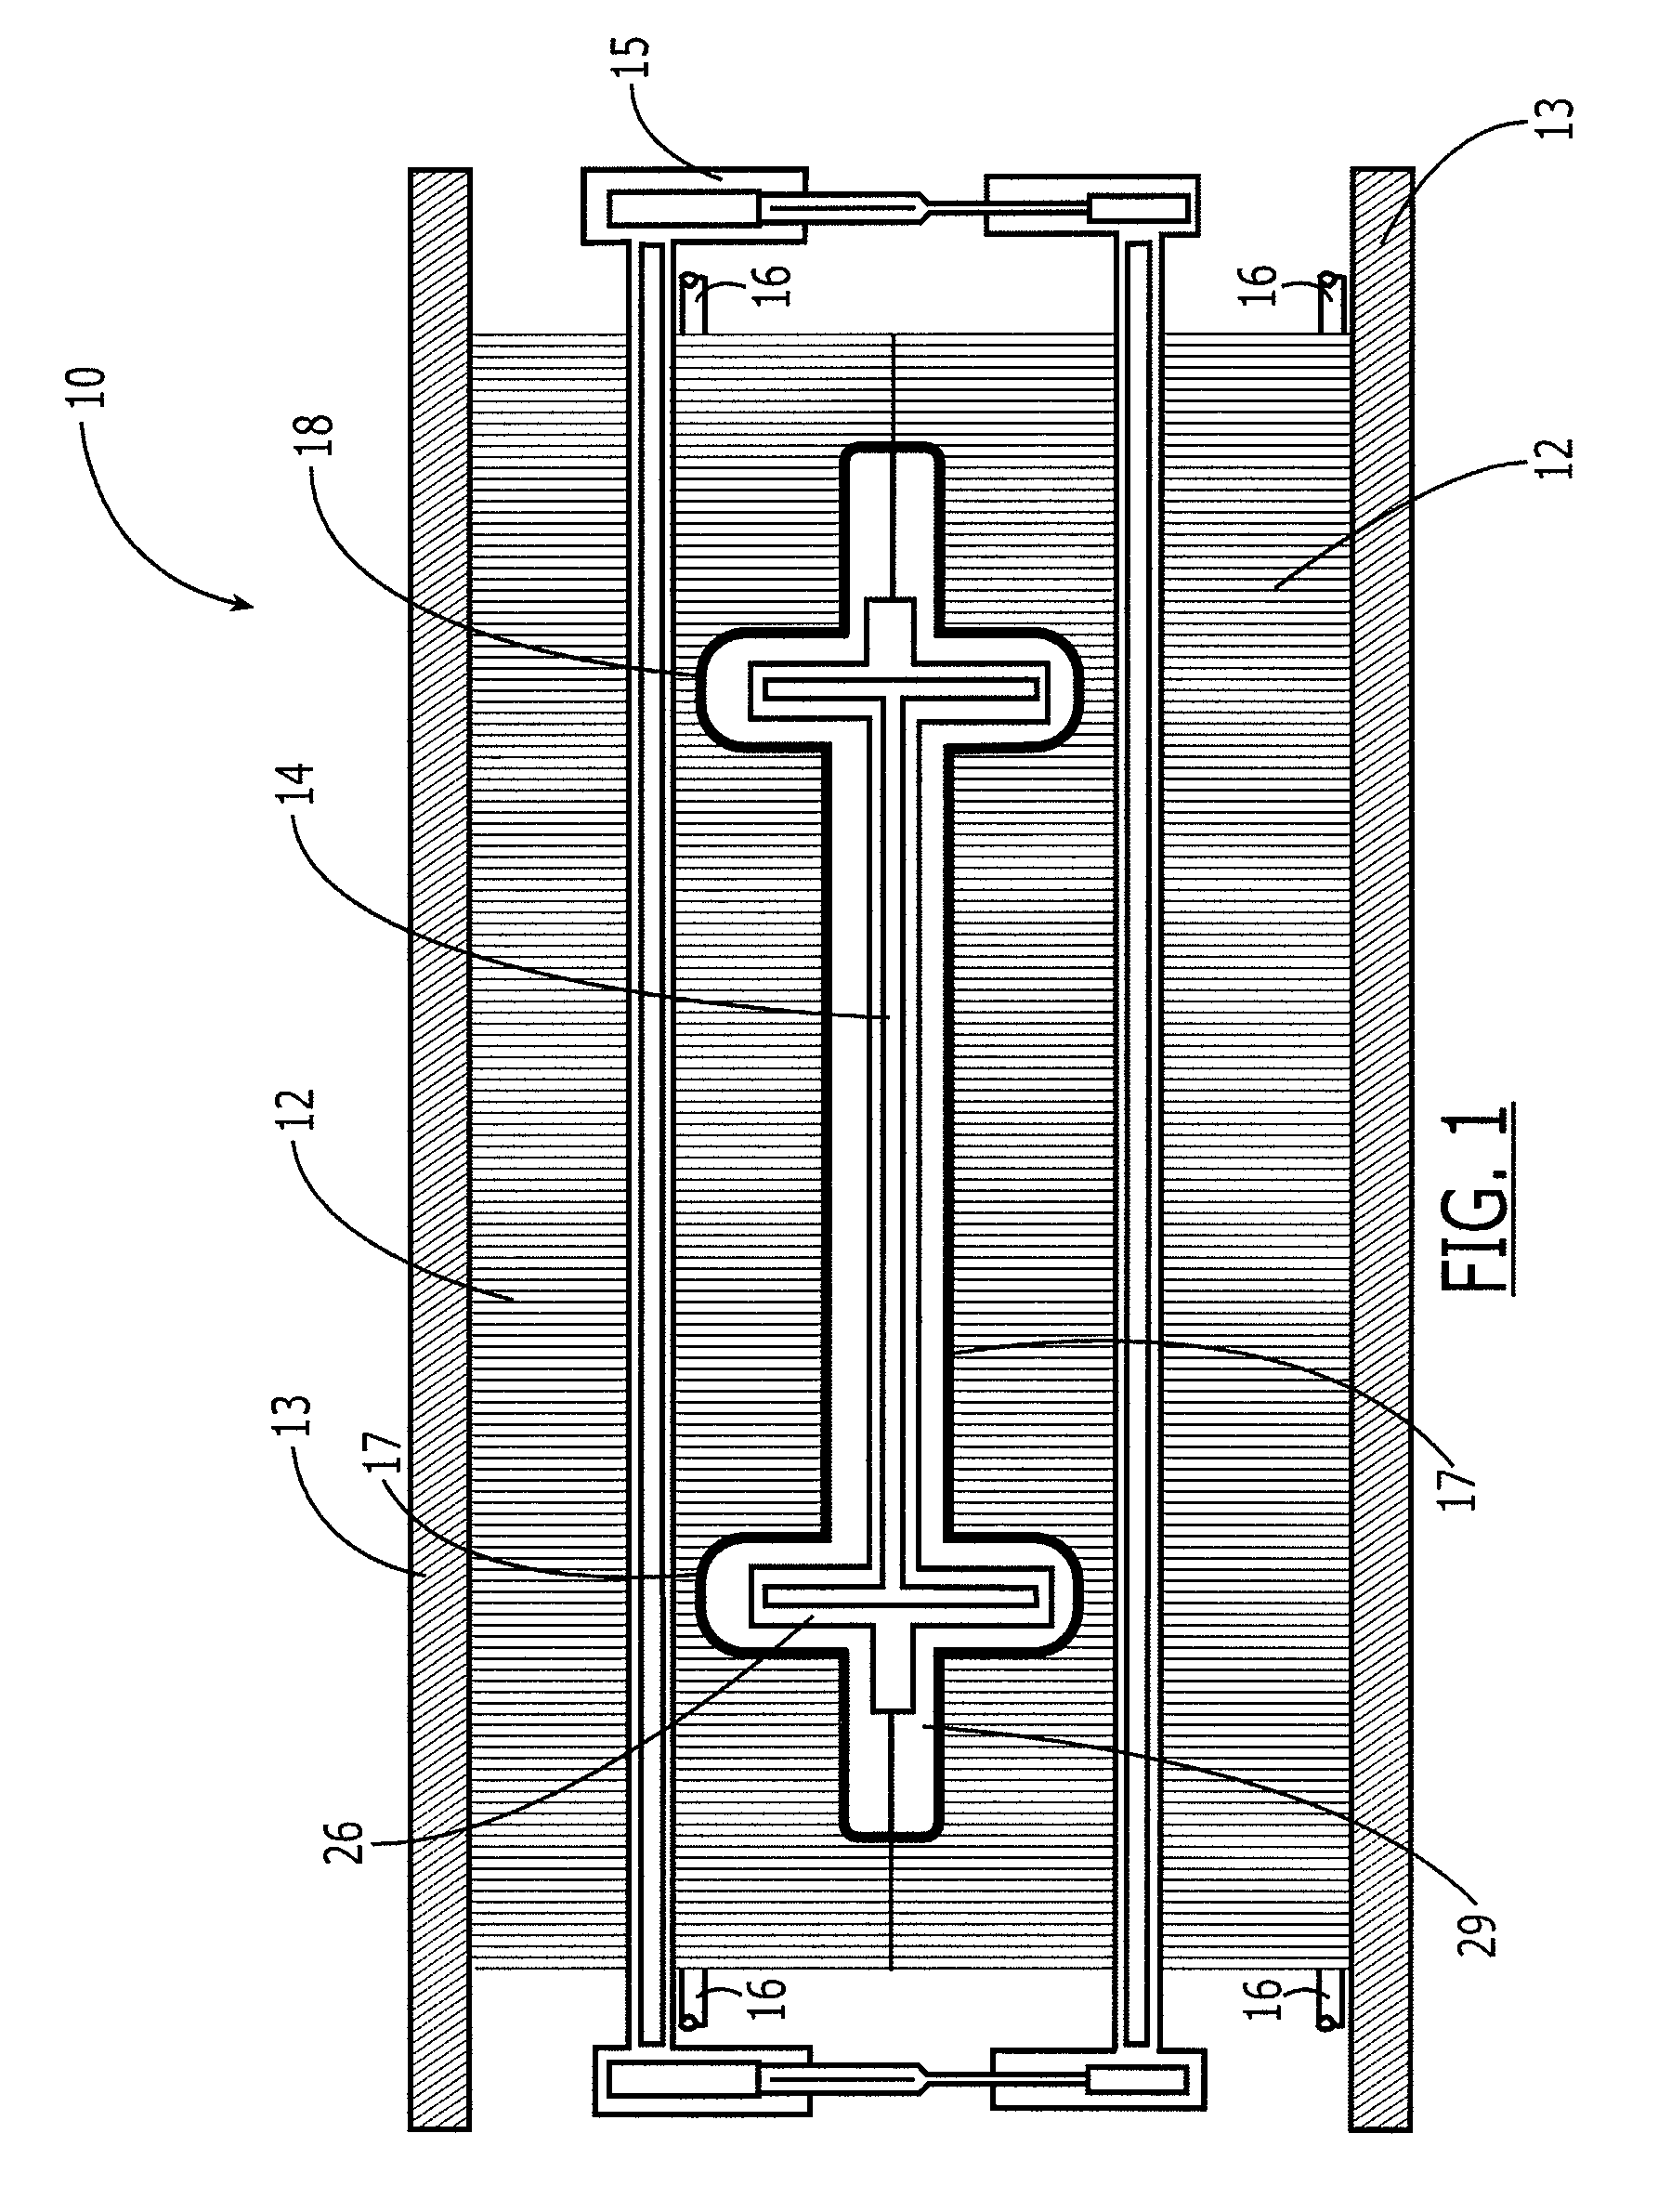 Forming Method And Apparatus And An Associated Preform Having A Hydrostatic Pressing Medium